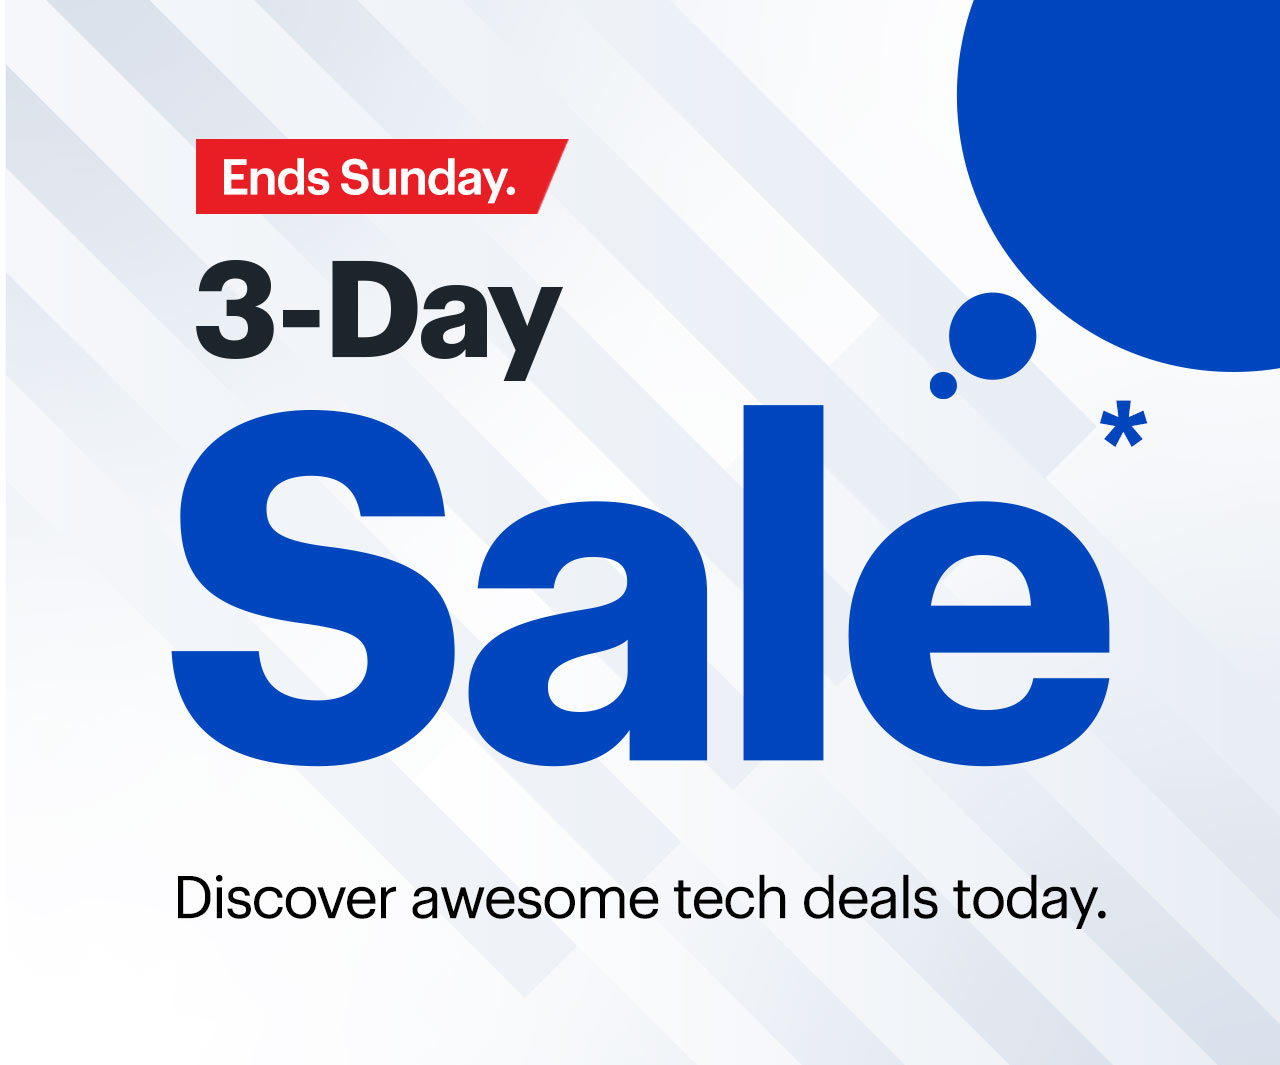 3-Day Sale ends Sunday. Discover awesome tech deals today. Reference disclaimer.